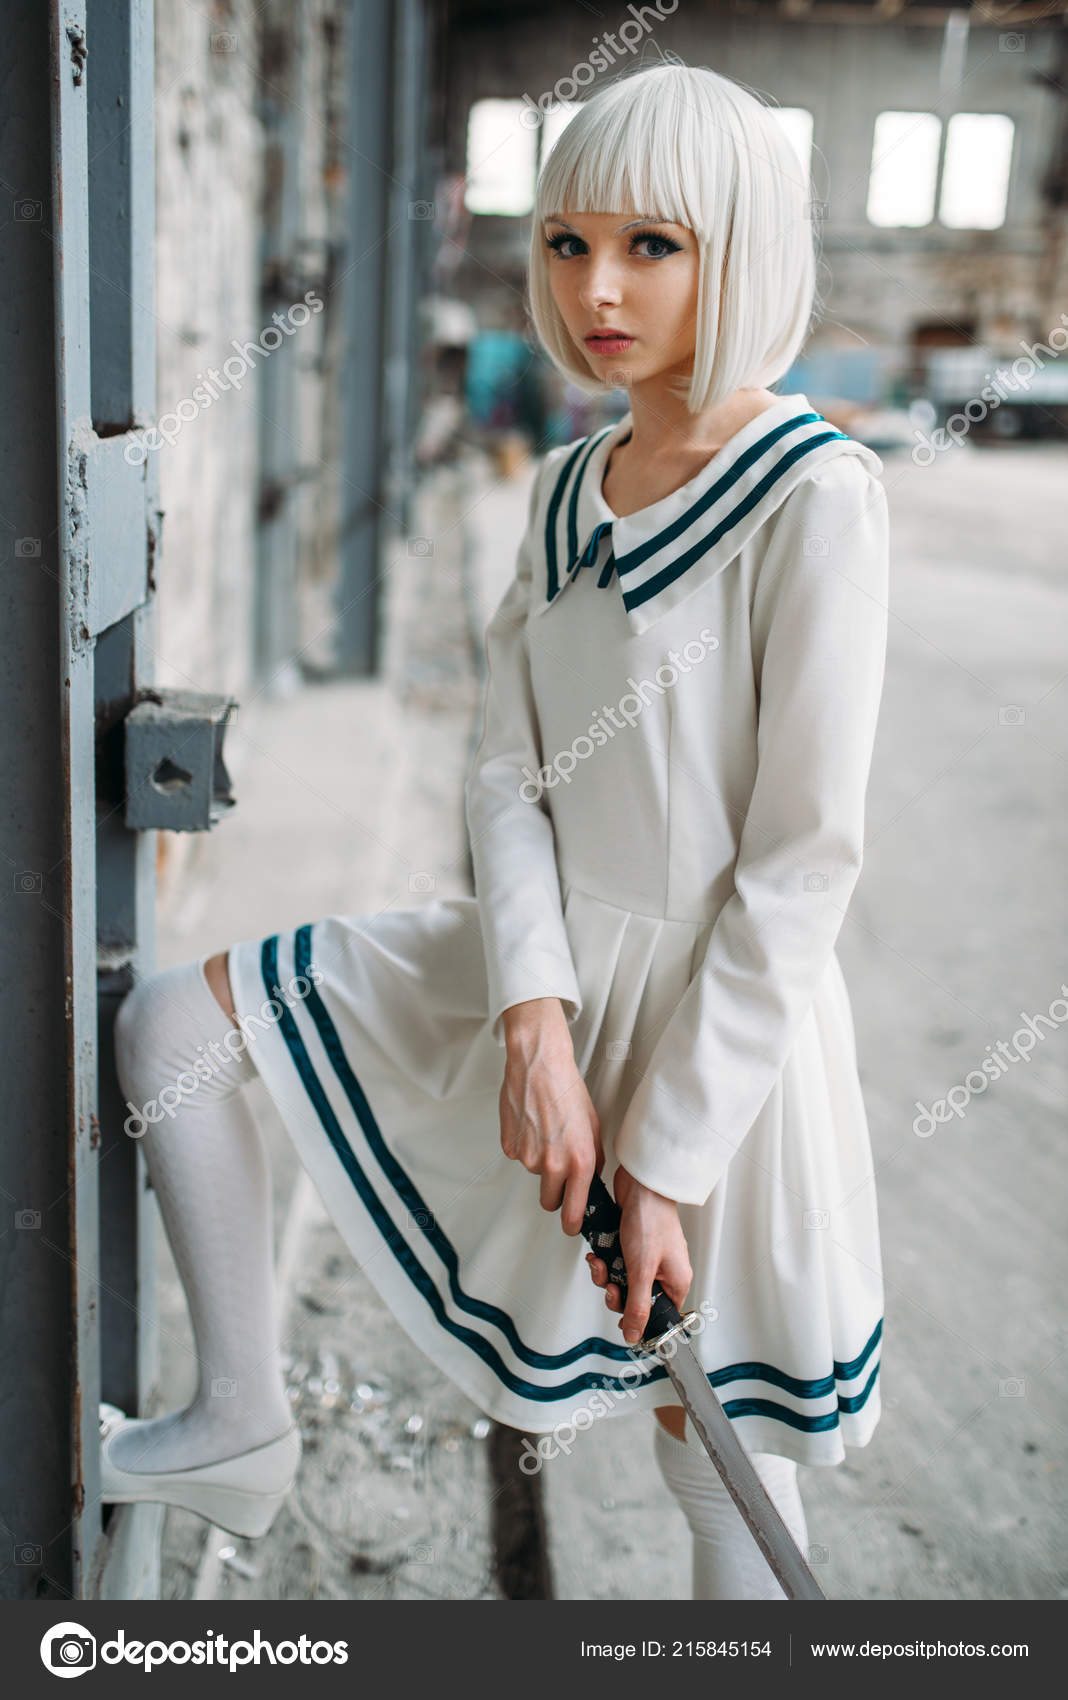 anime makeup and hairstyle Stock Photo